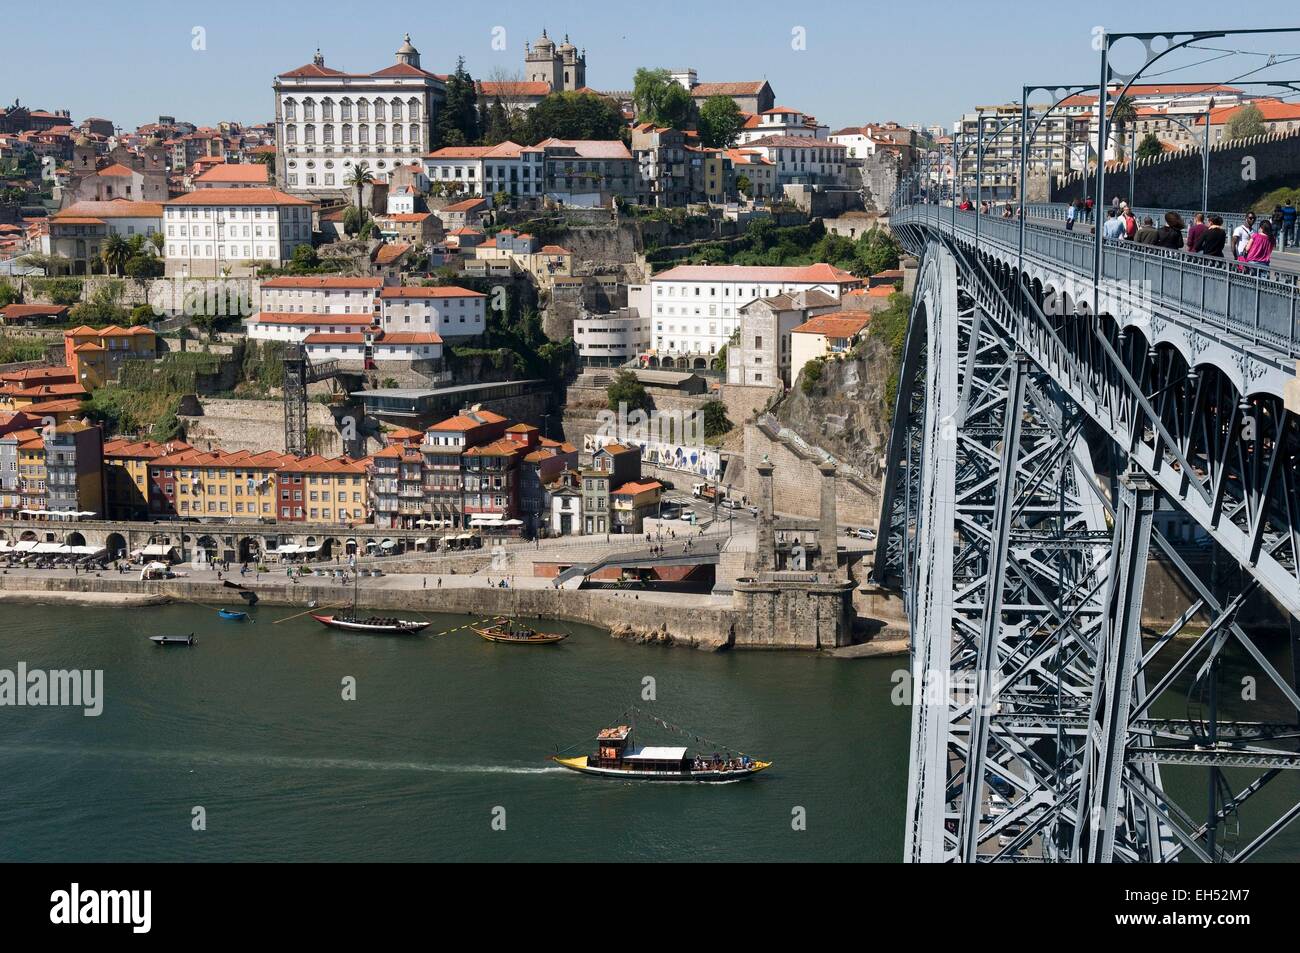 Portugal, North Region, Porto, historical center listed as World Heritage by UNESCO, Cais de Ribeira historic district and Eiffel style Dom Luis I bridge Stock Photo